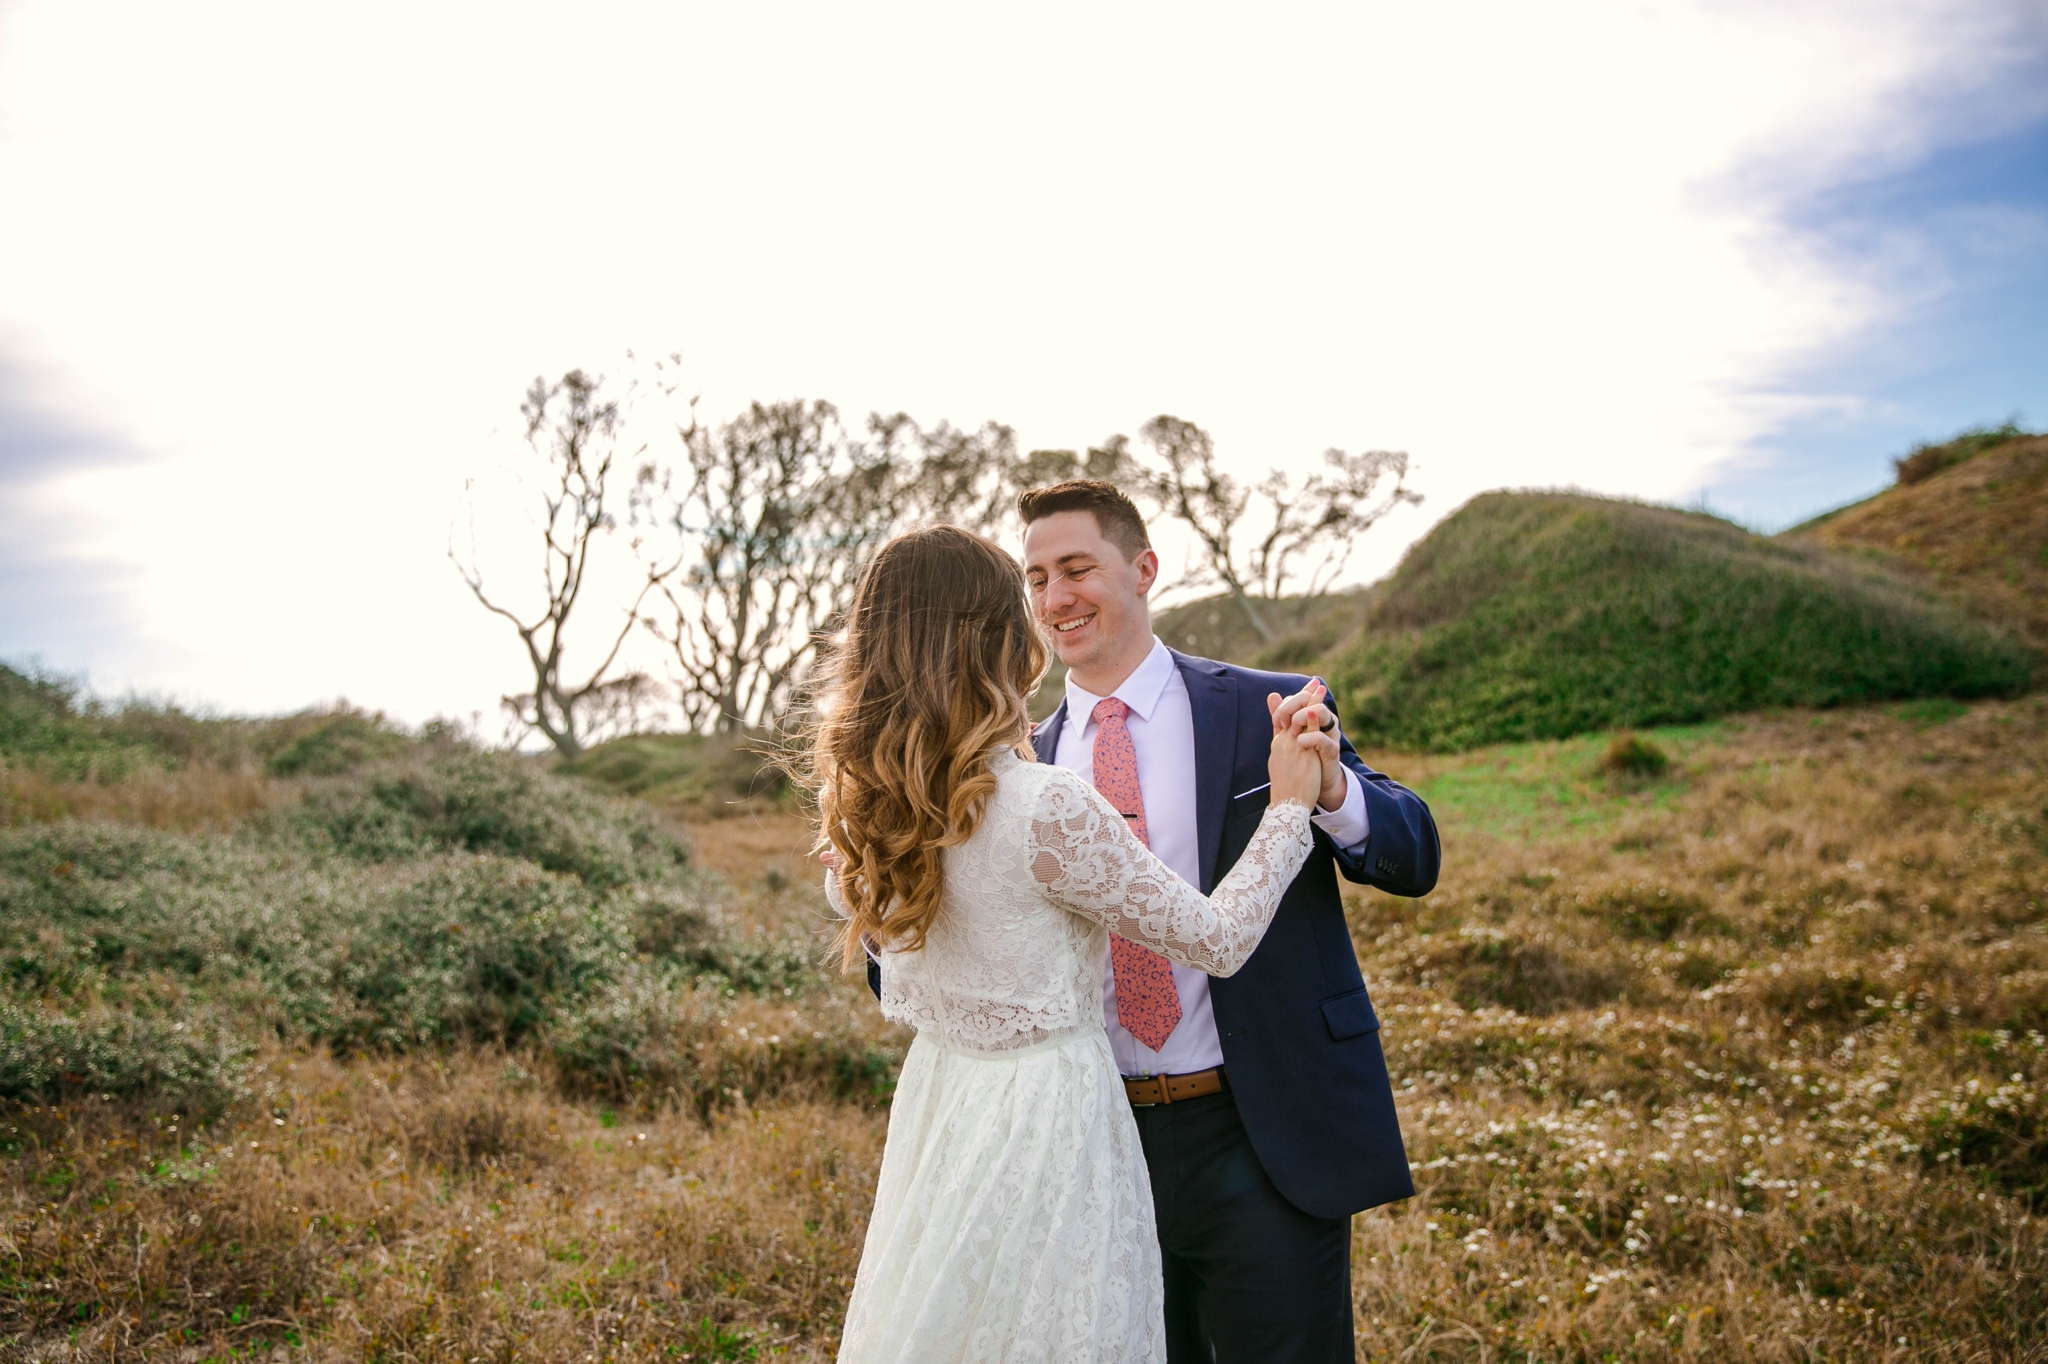 Bride and groom dancing in Lush Green Grass - Beach Elopement Photography - wedding dress by asos with purple and pink flowers and navy suit - oahu hawaii wedding photographer